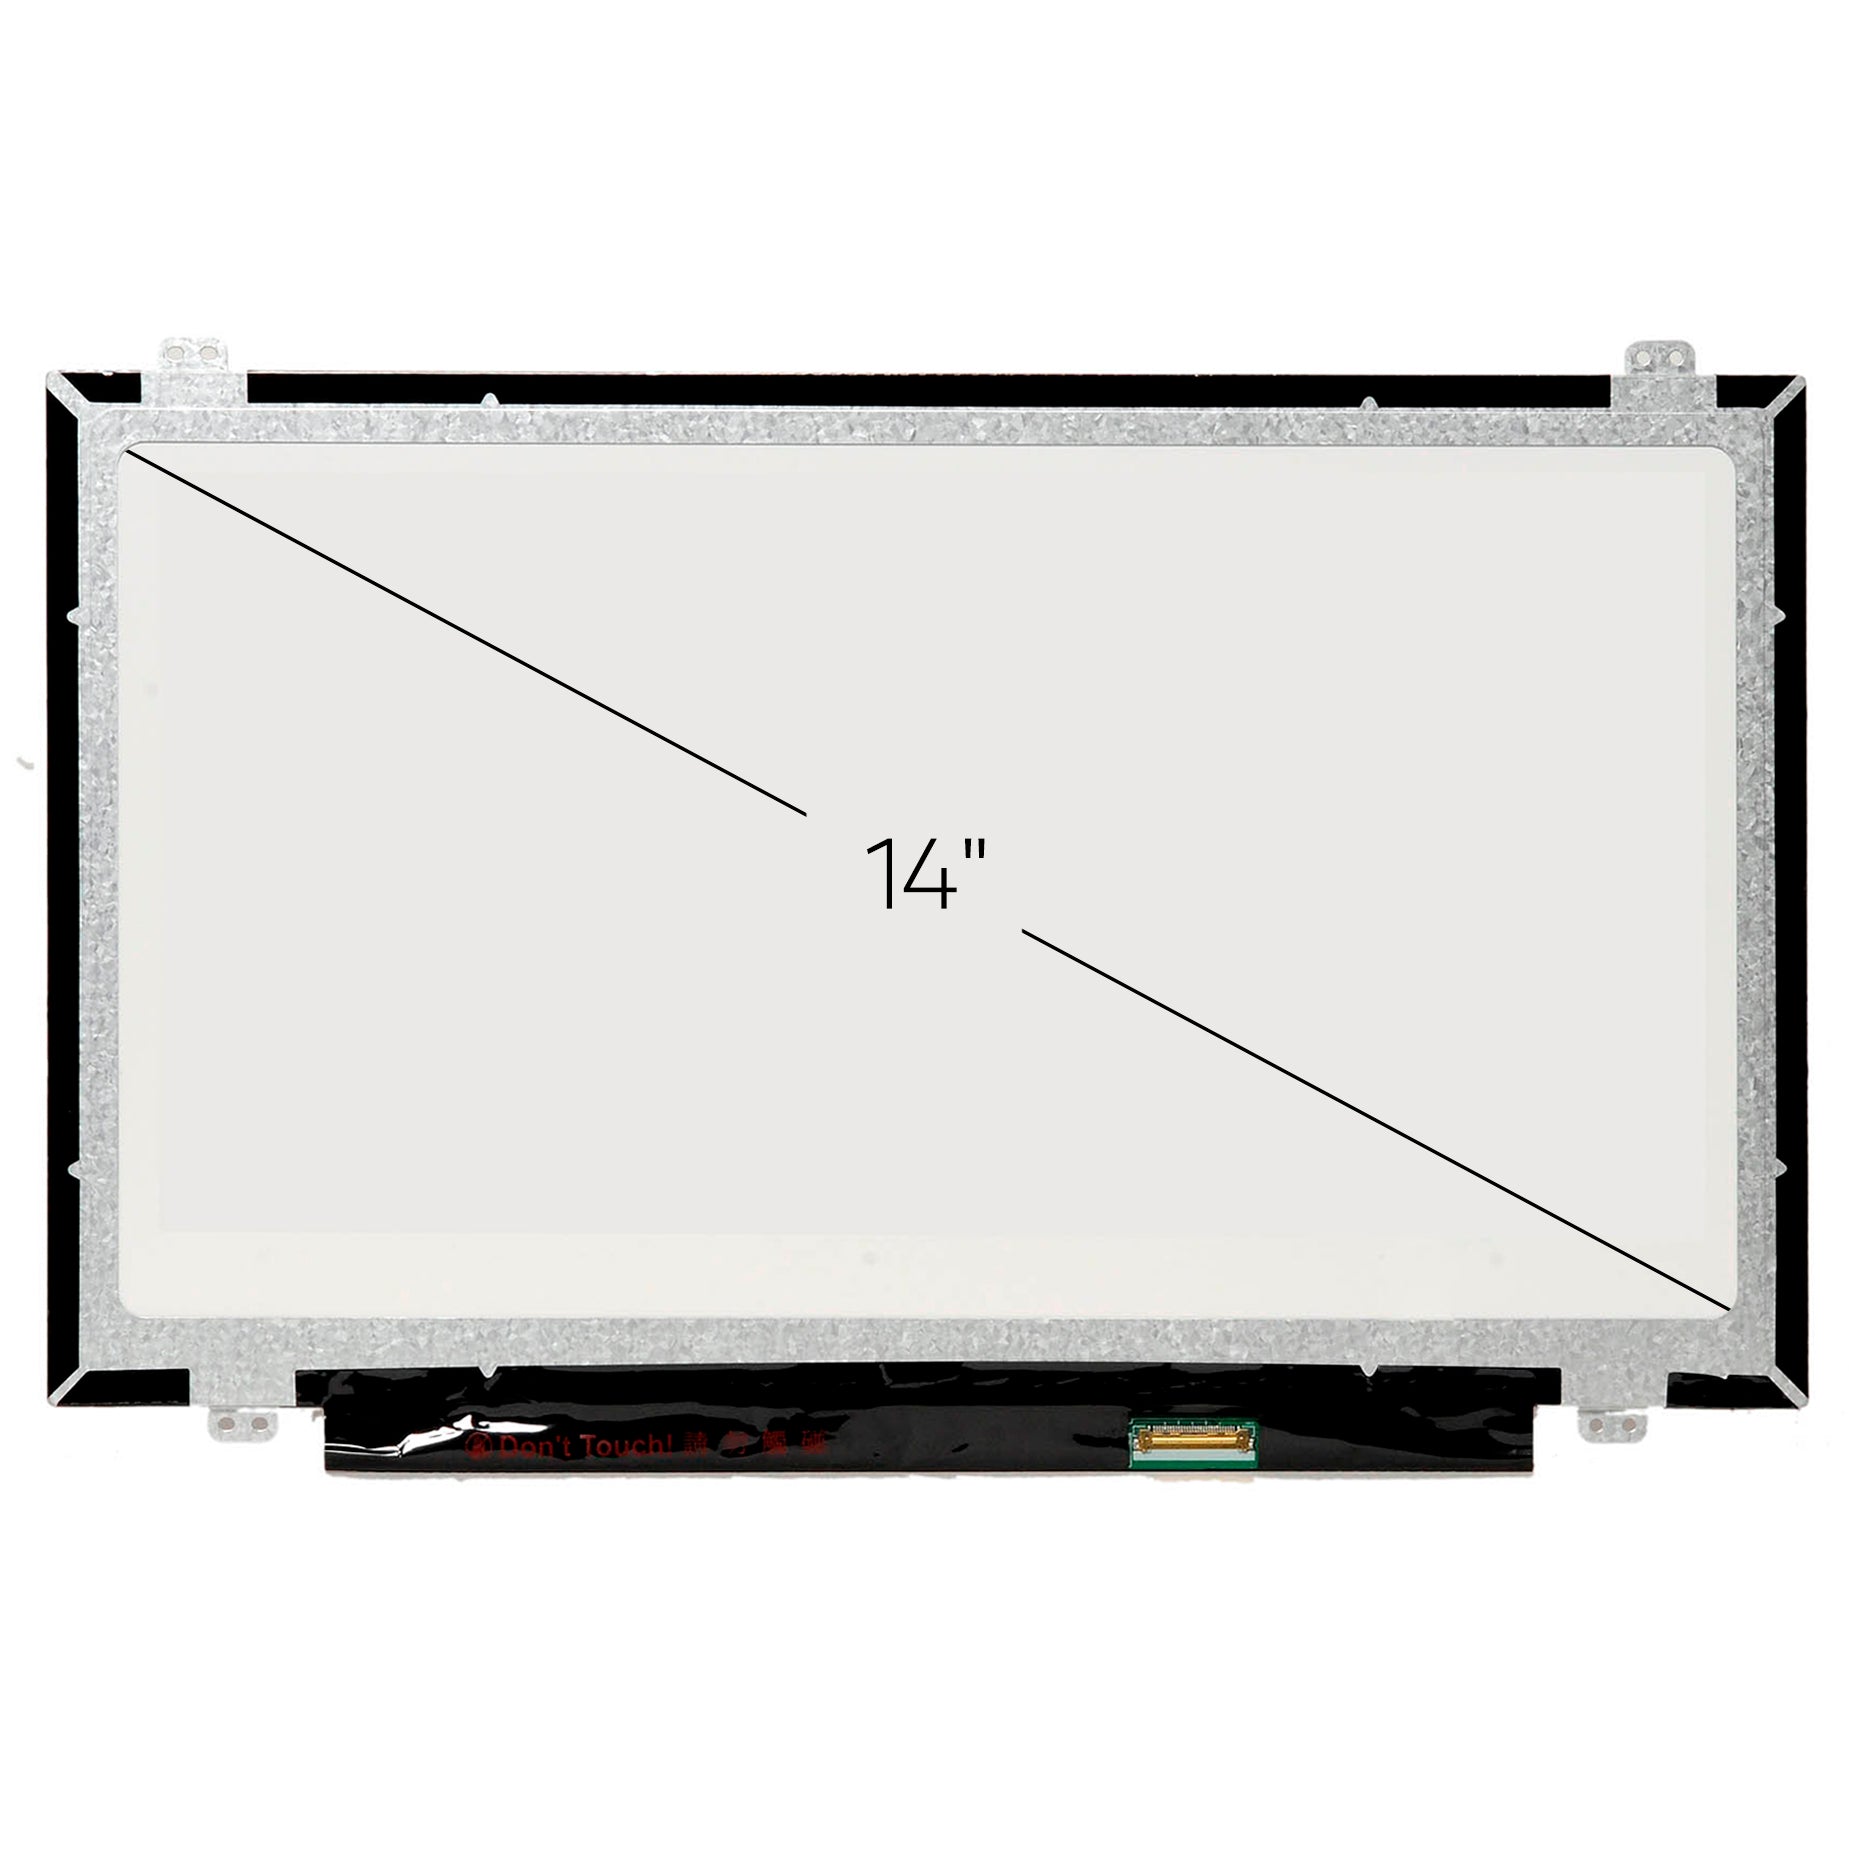 Screen Replacement for ASUS VivoBook E403N HD 1366x768 Glossy LCD LED Display